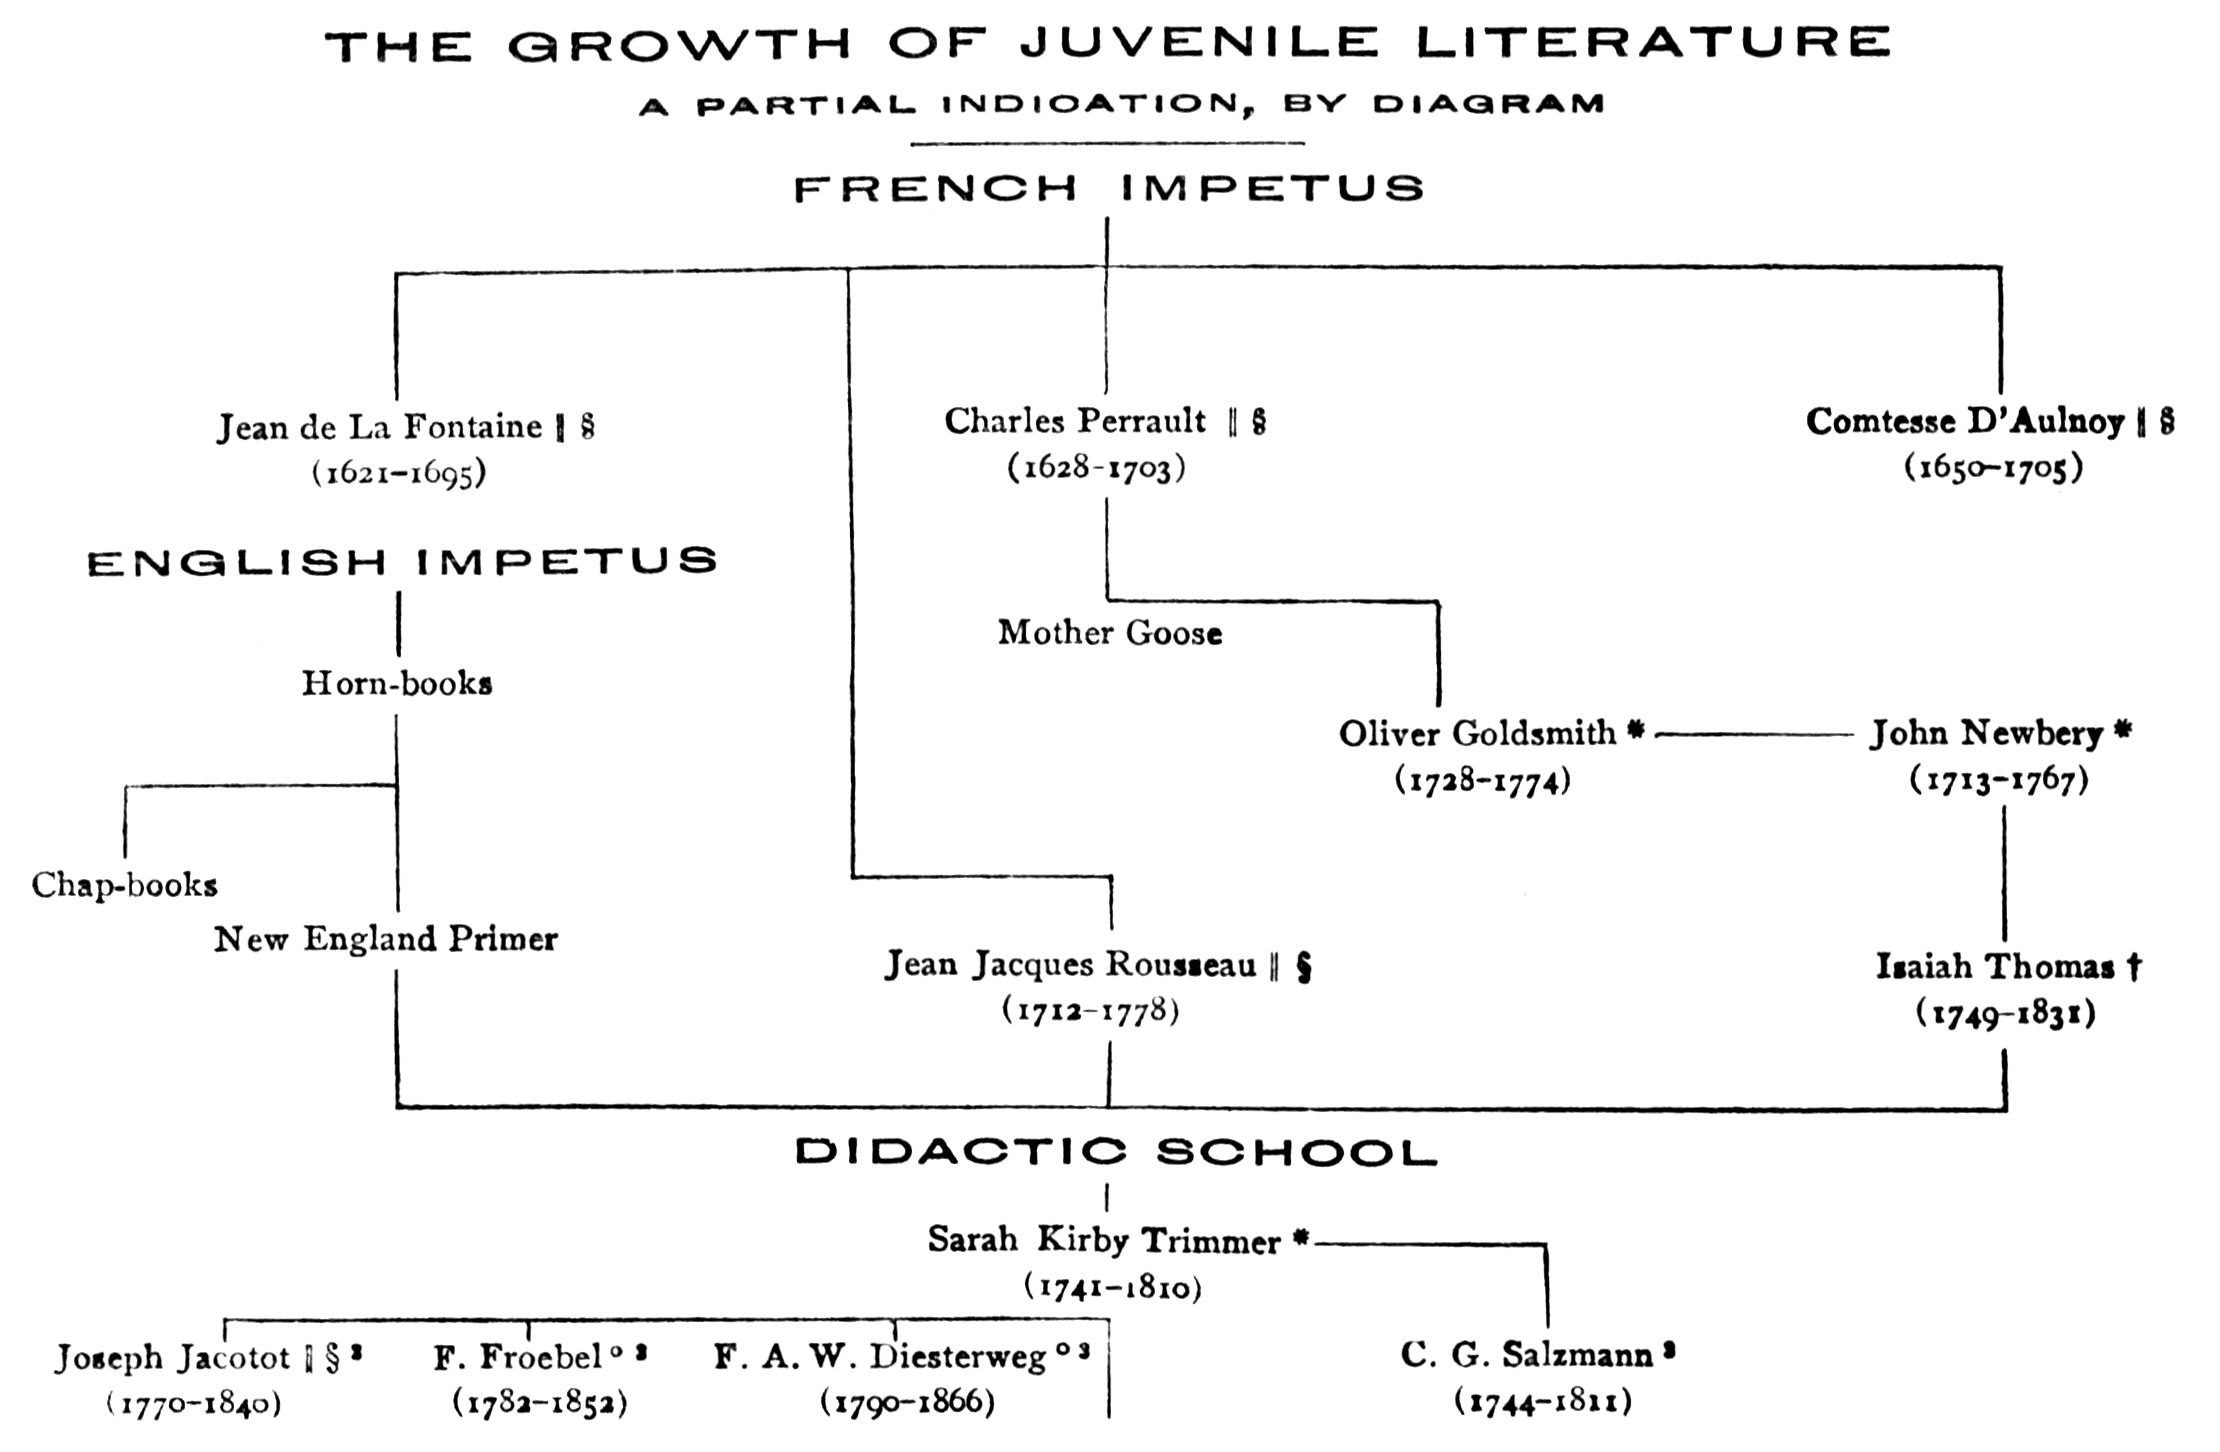 The Growth of Juvenile Literature